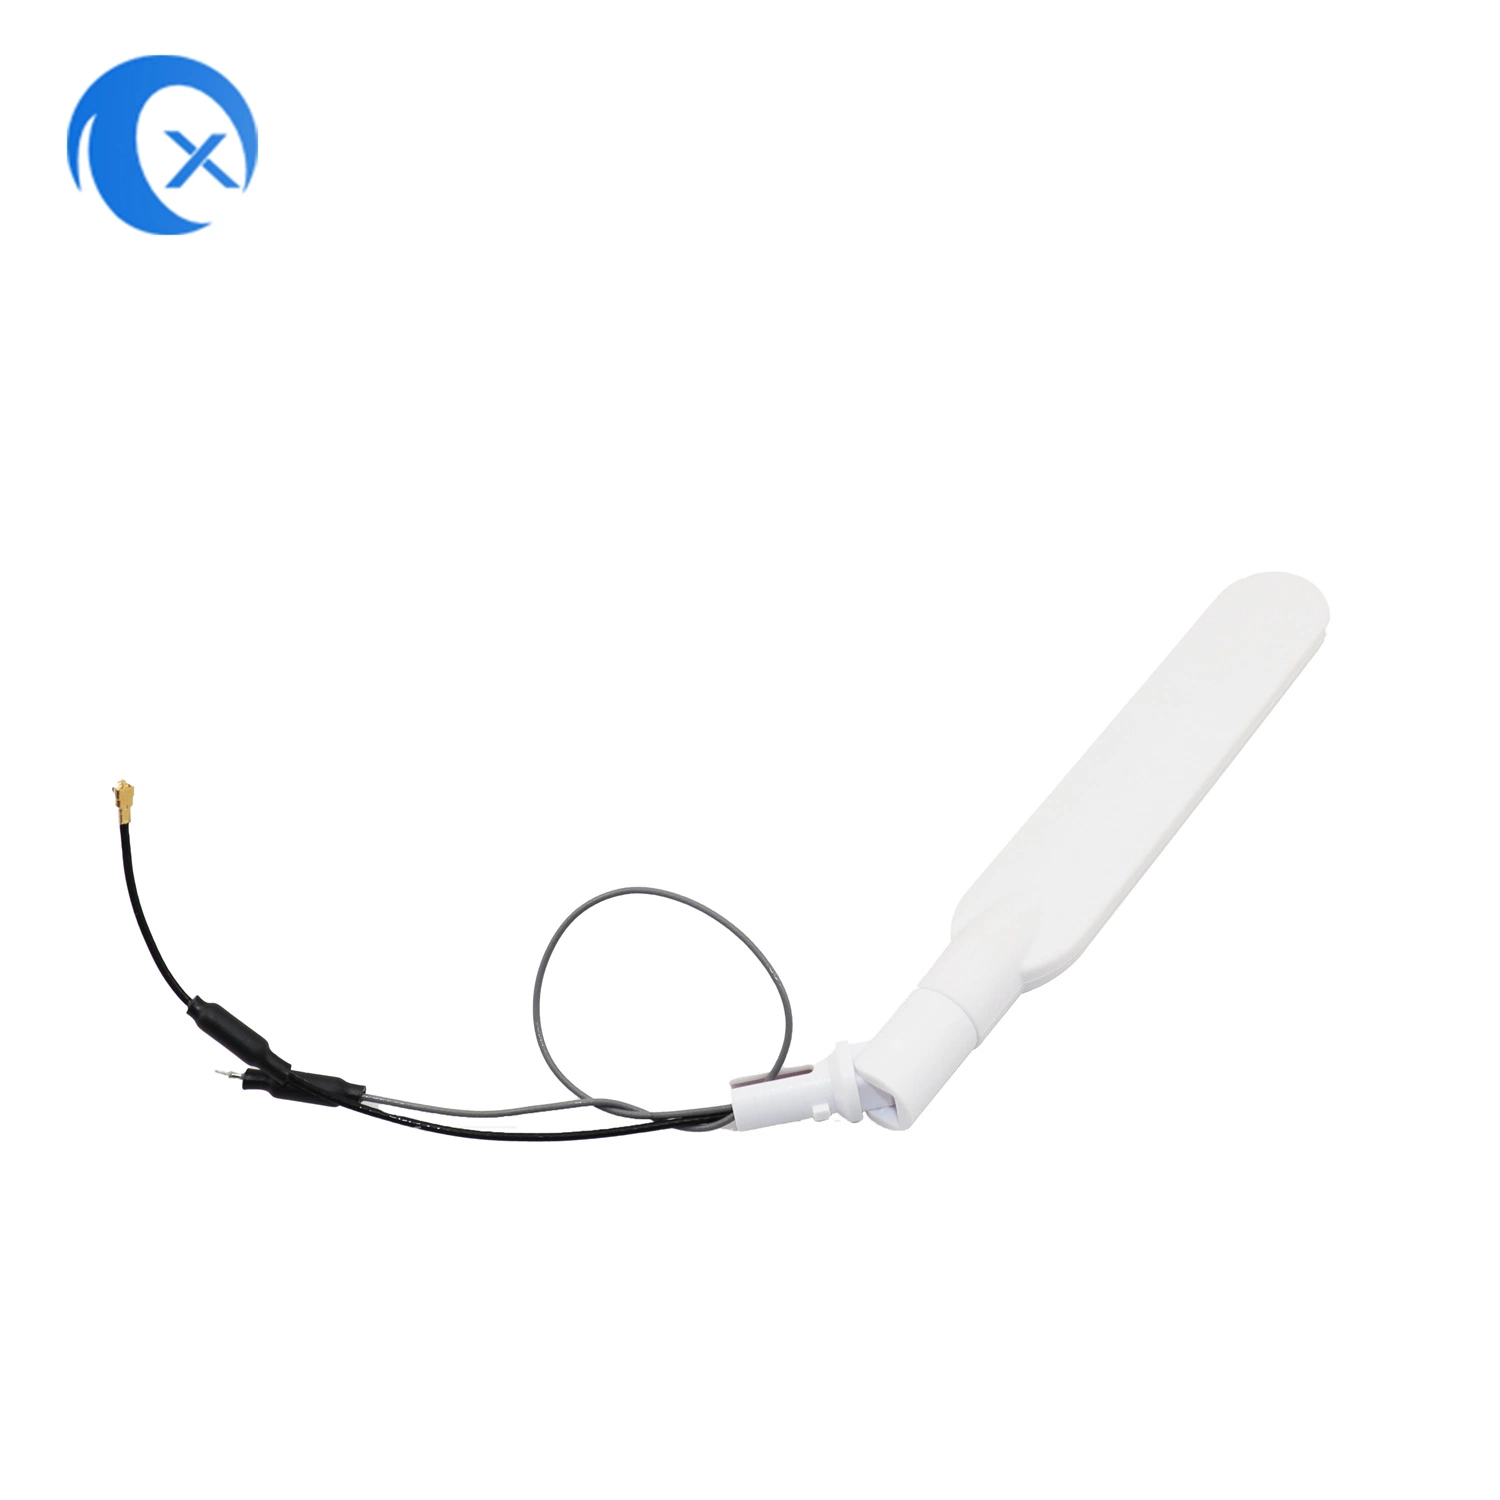 2.4G Omnidirectional WiFi Swivel Paddle Antenna with Flying Lead